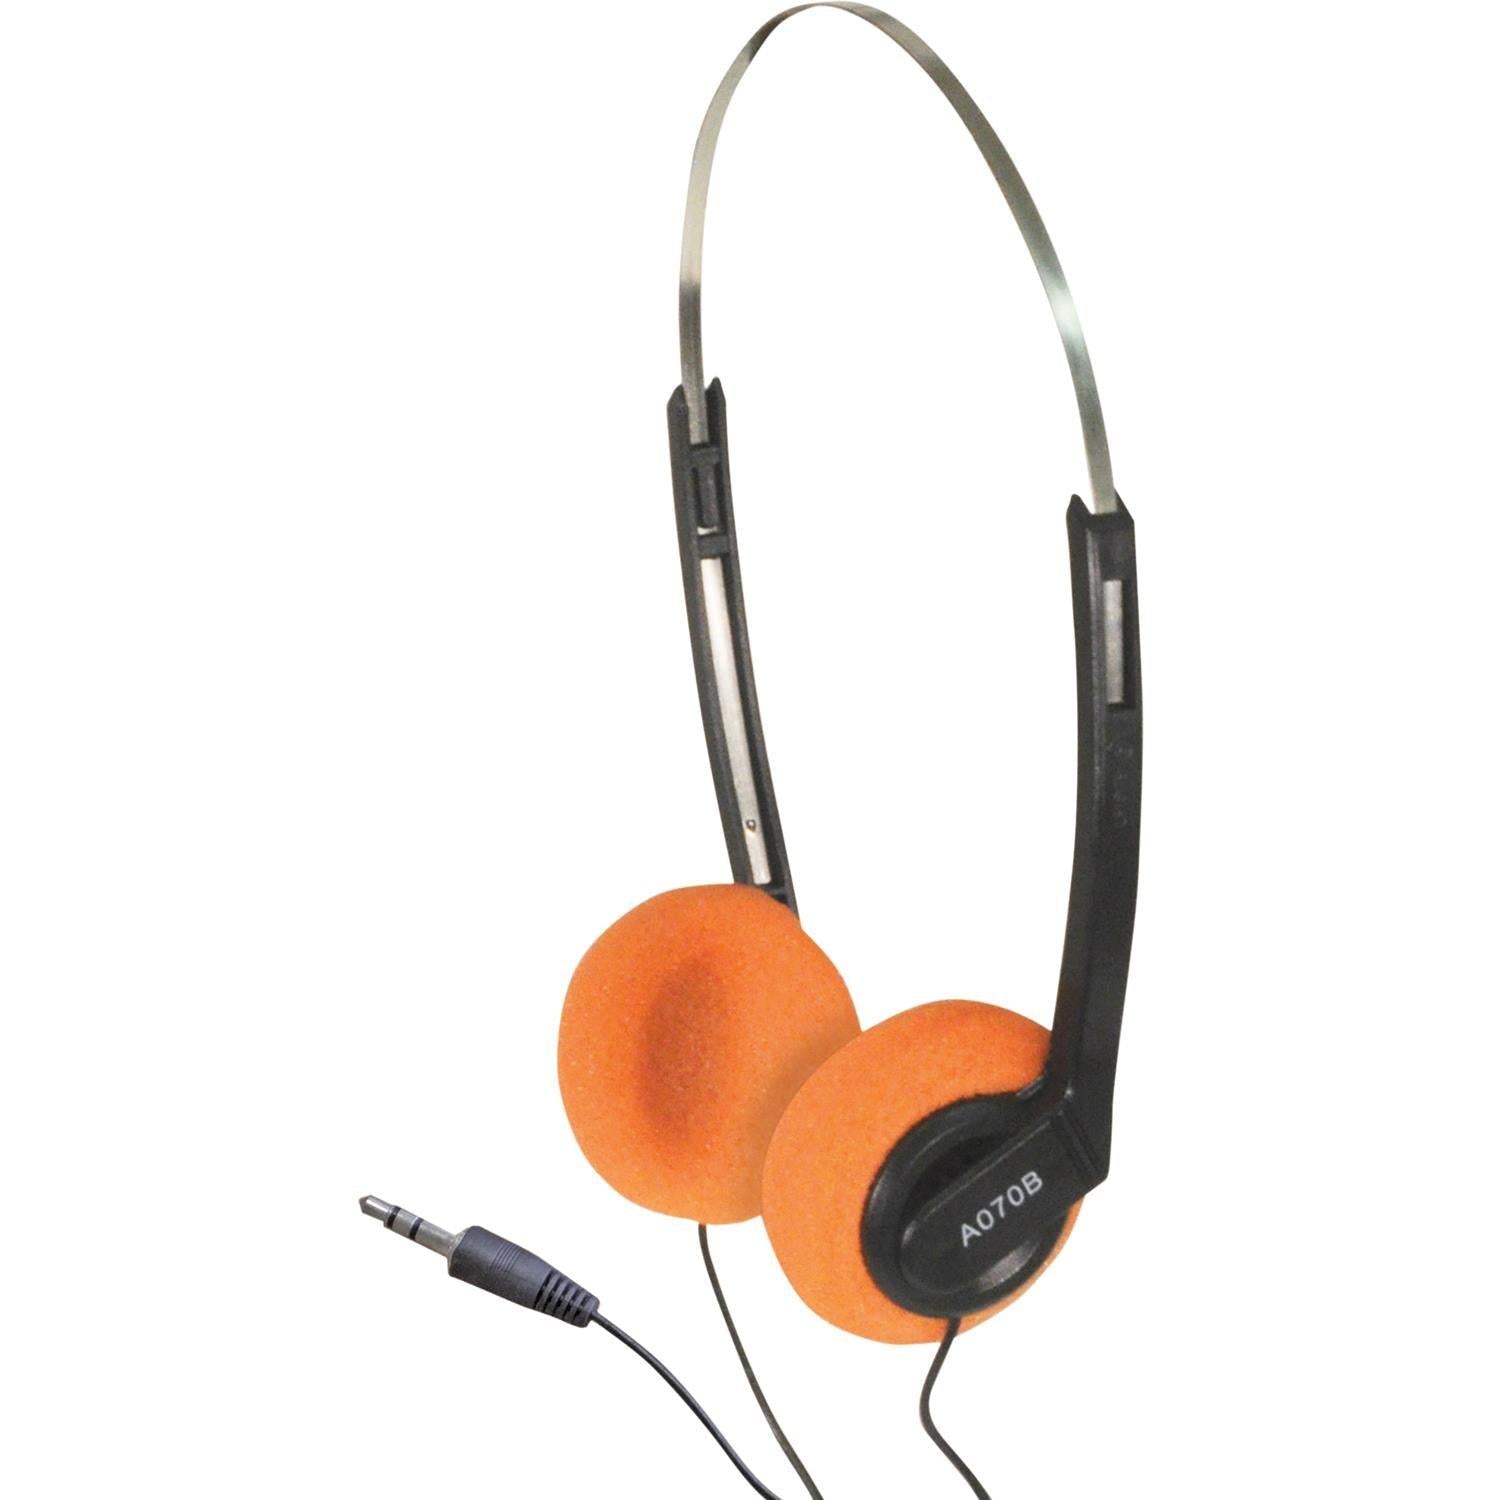 10 x Soundlab Lightweight Stereo Headphones with Orange Pads - DY Pro Audio